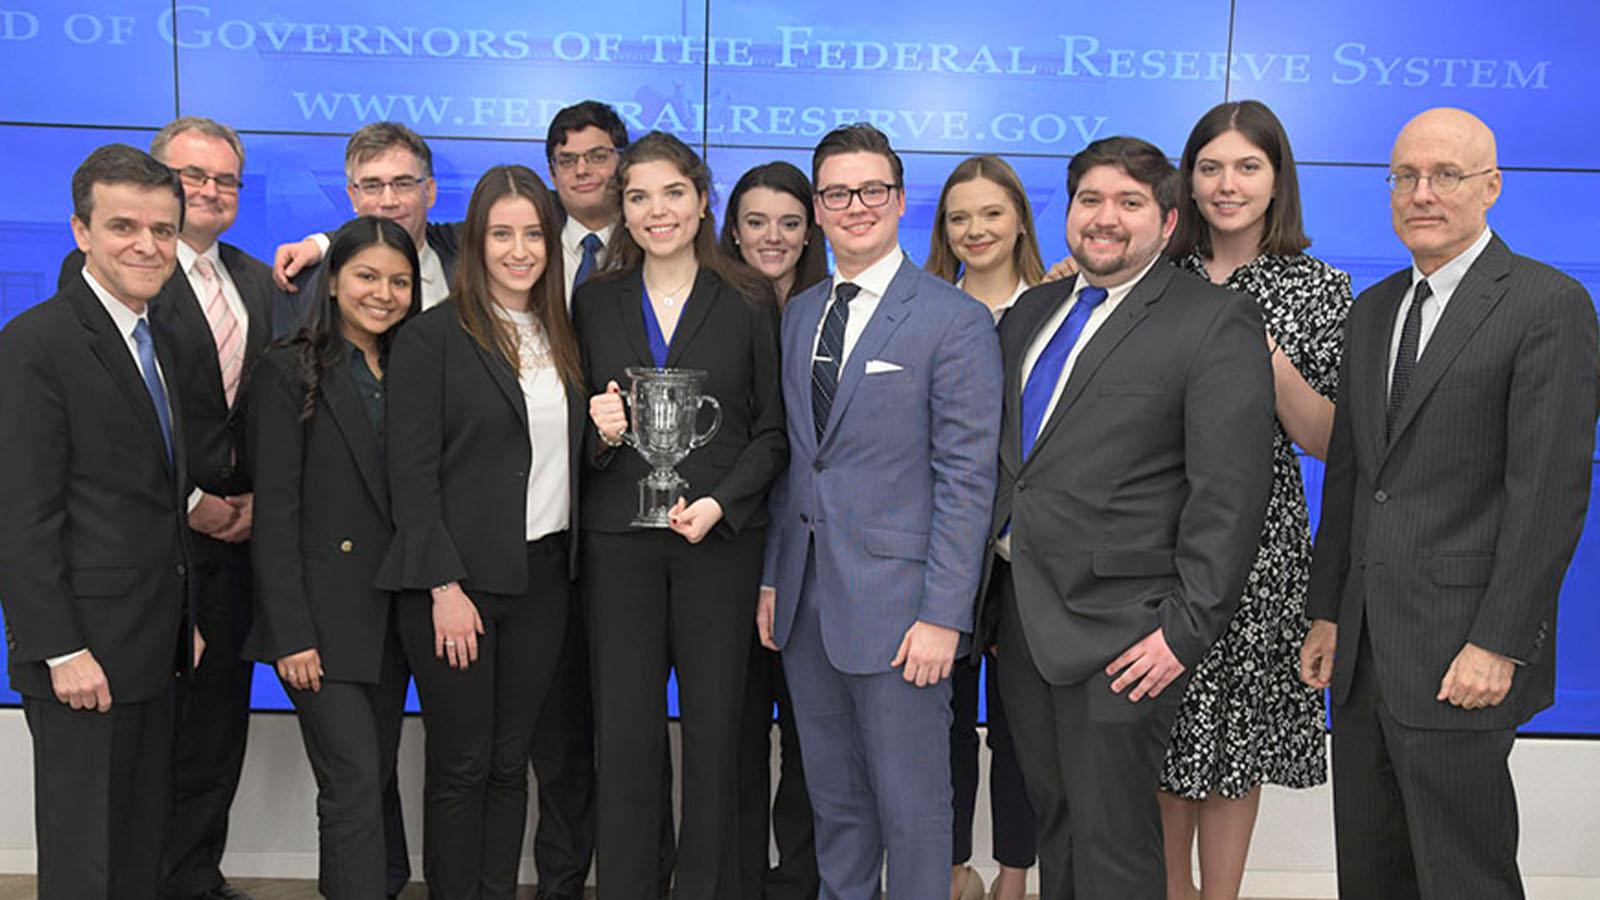 Group photo of the 2019 Federal Reserve Challenge team